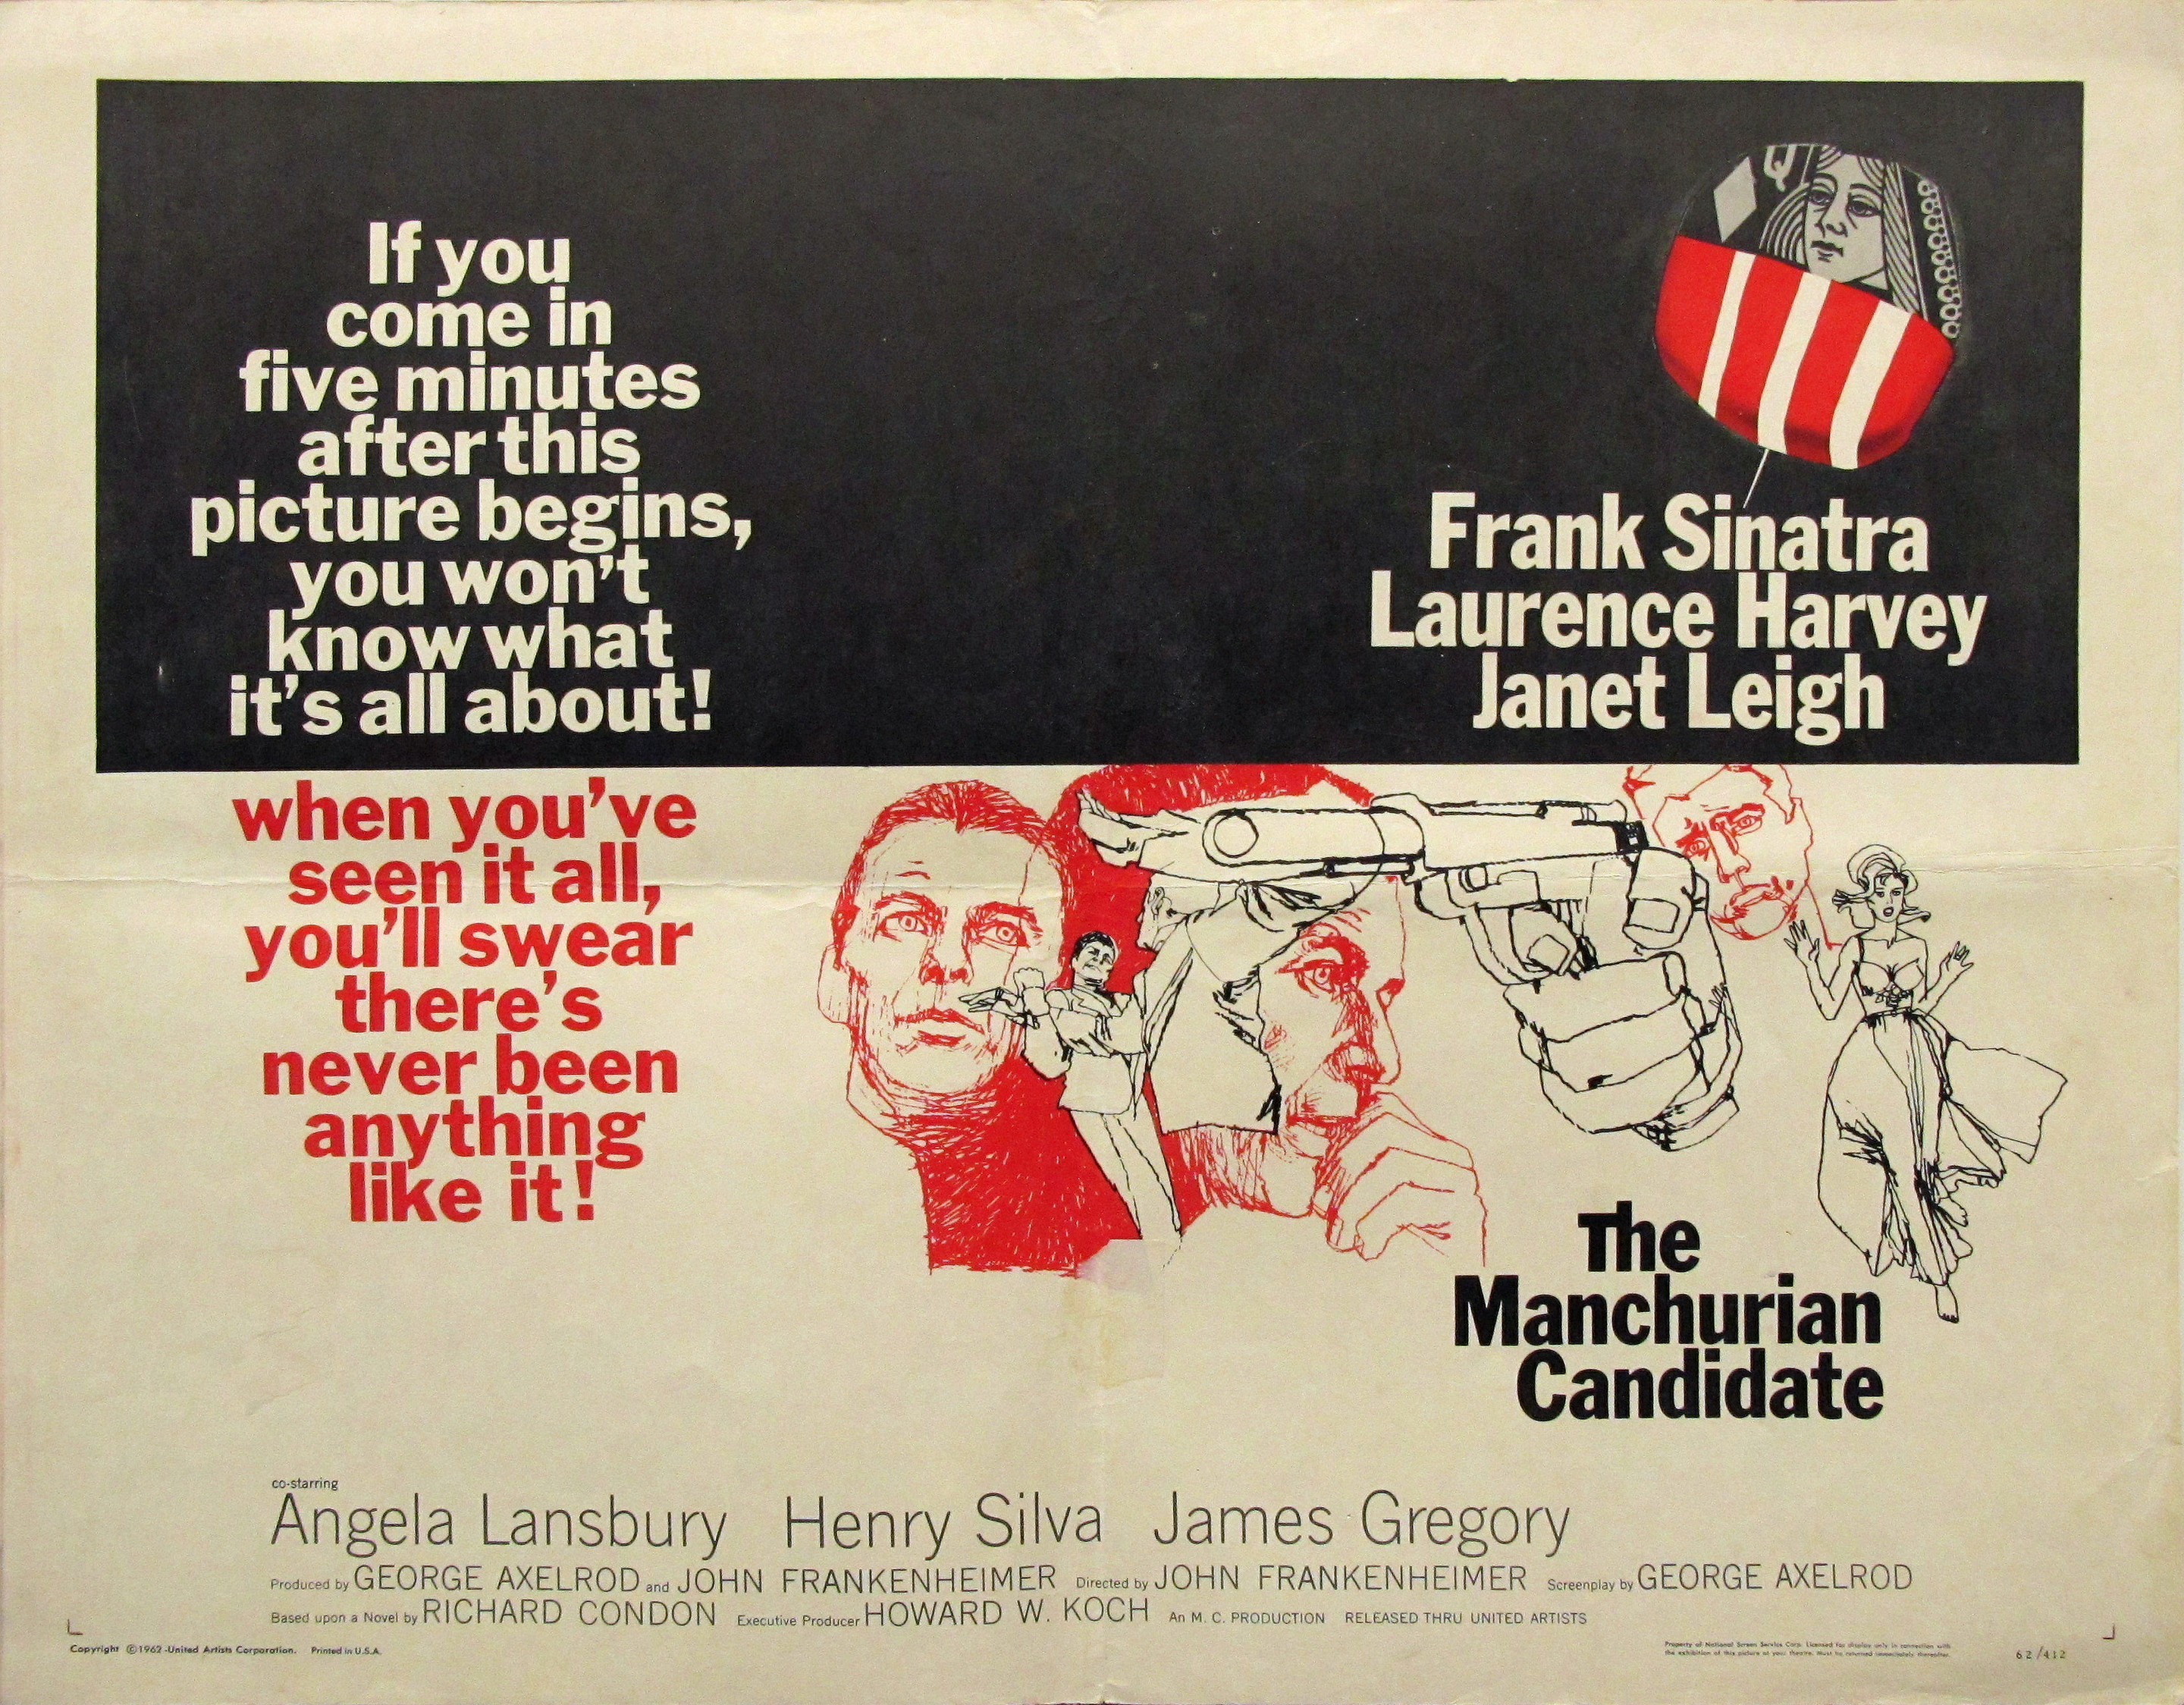 The Manchurian Candidate